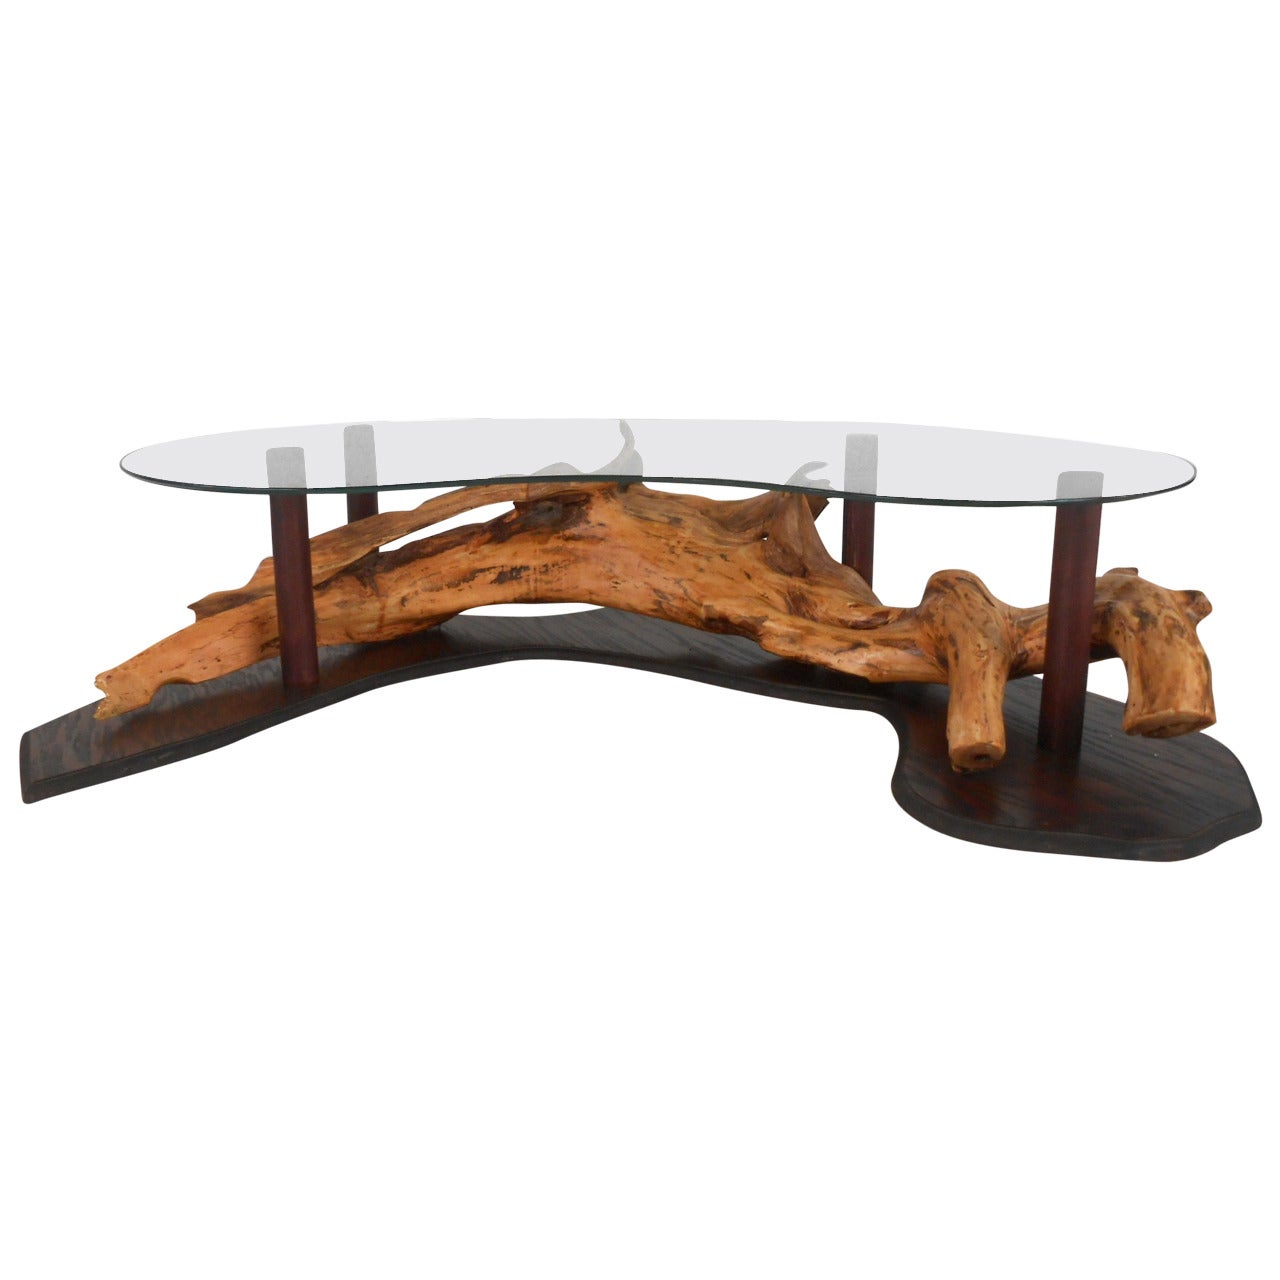 Unique Mid-Century Modern Rustic Driftwood Glass Top Coffee Table